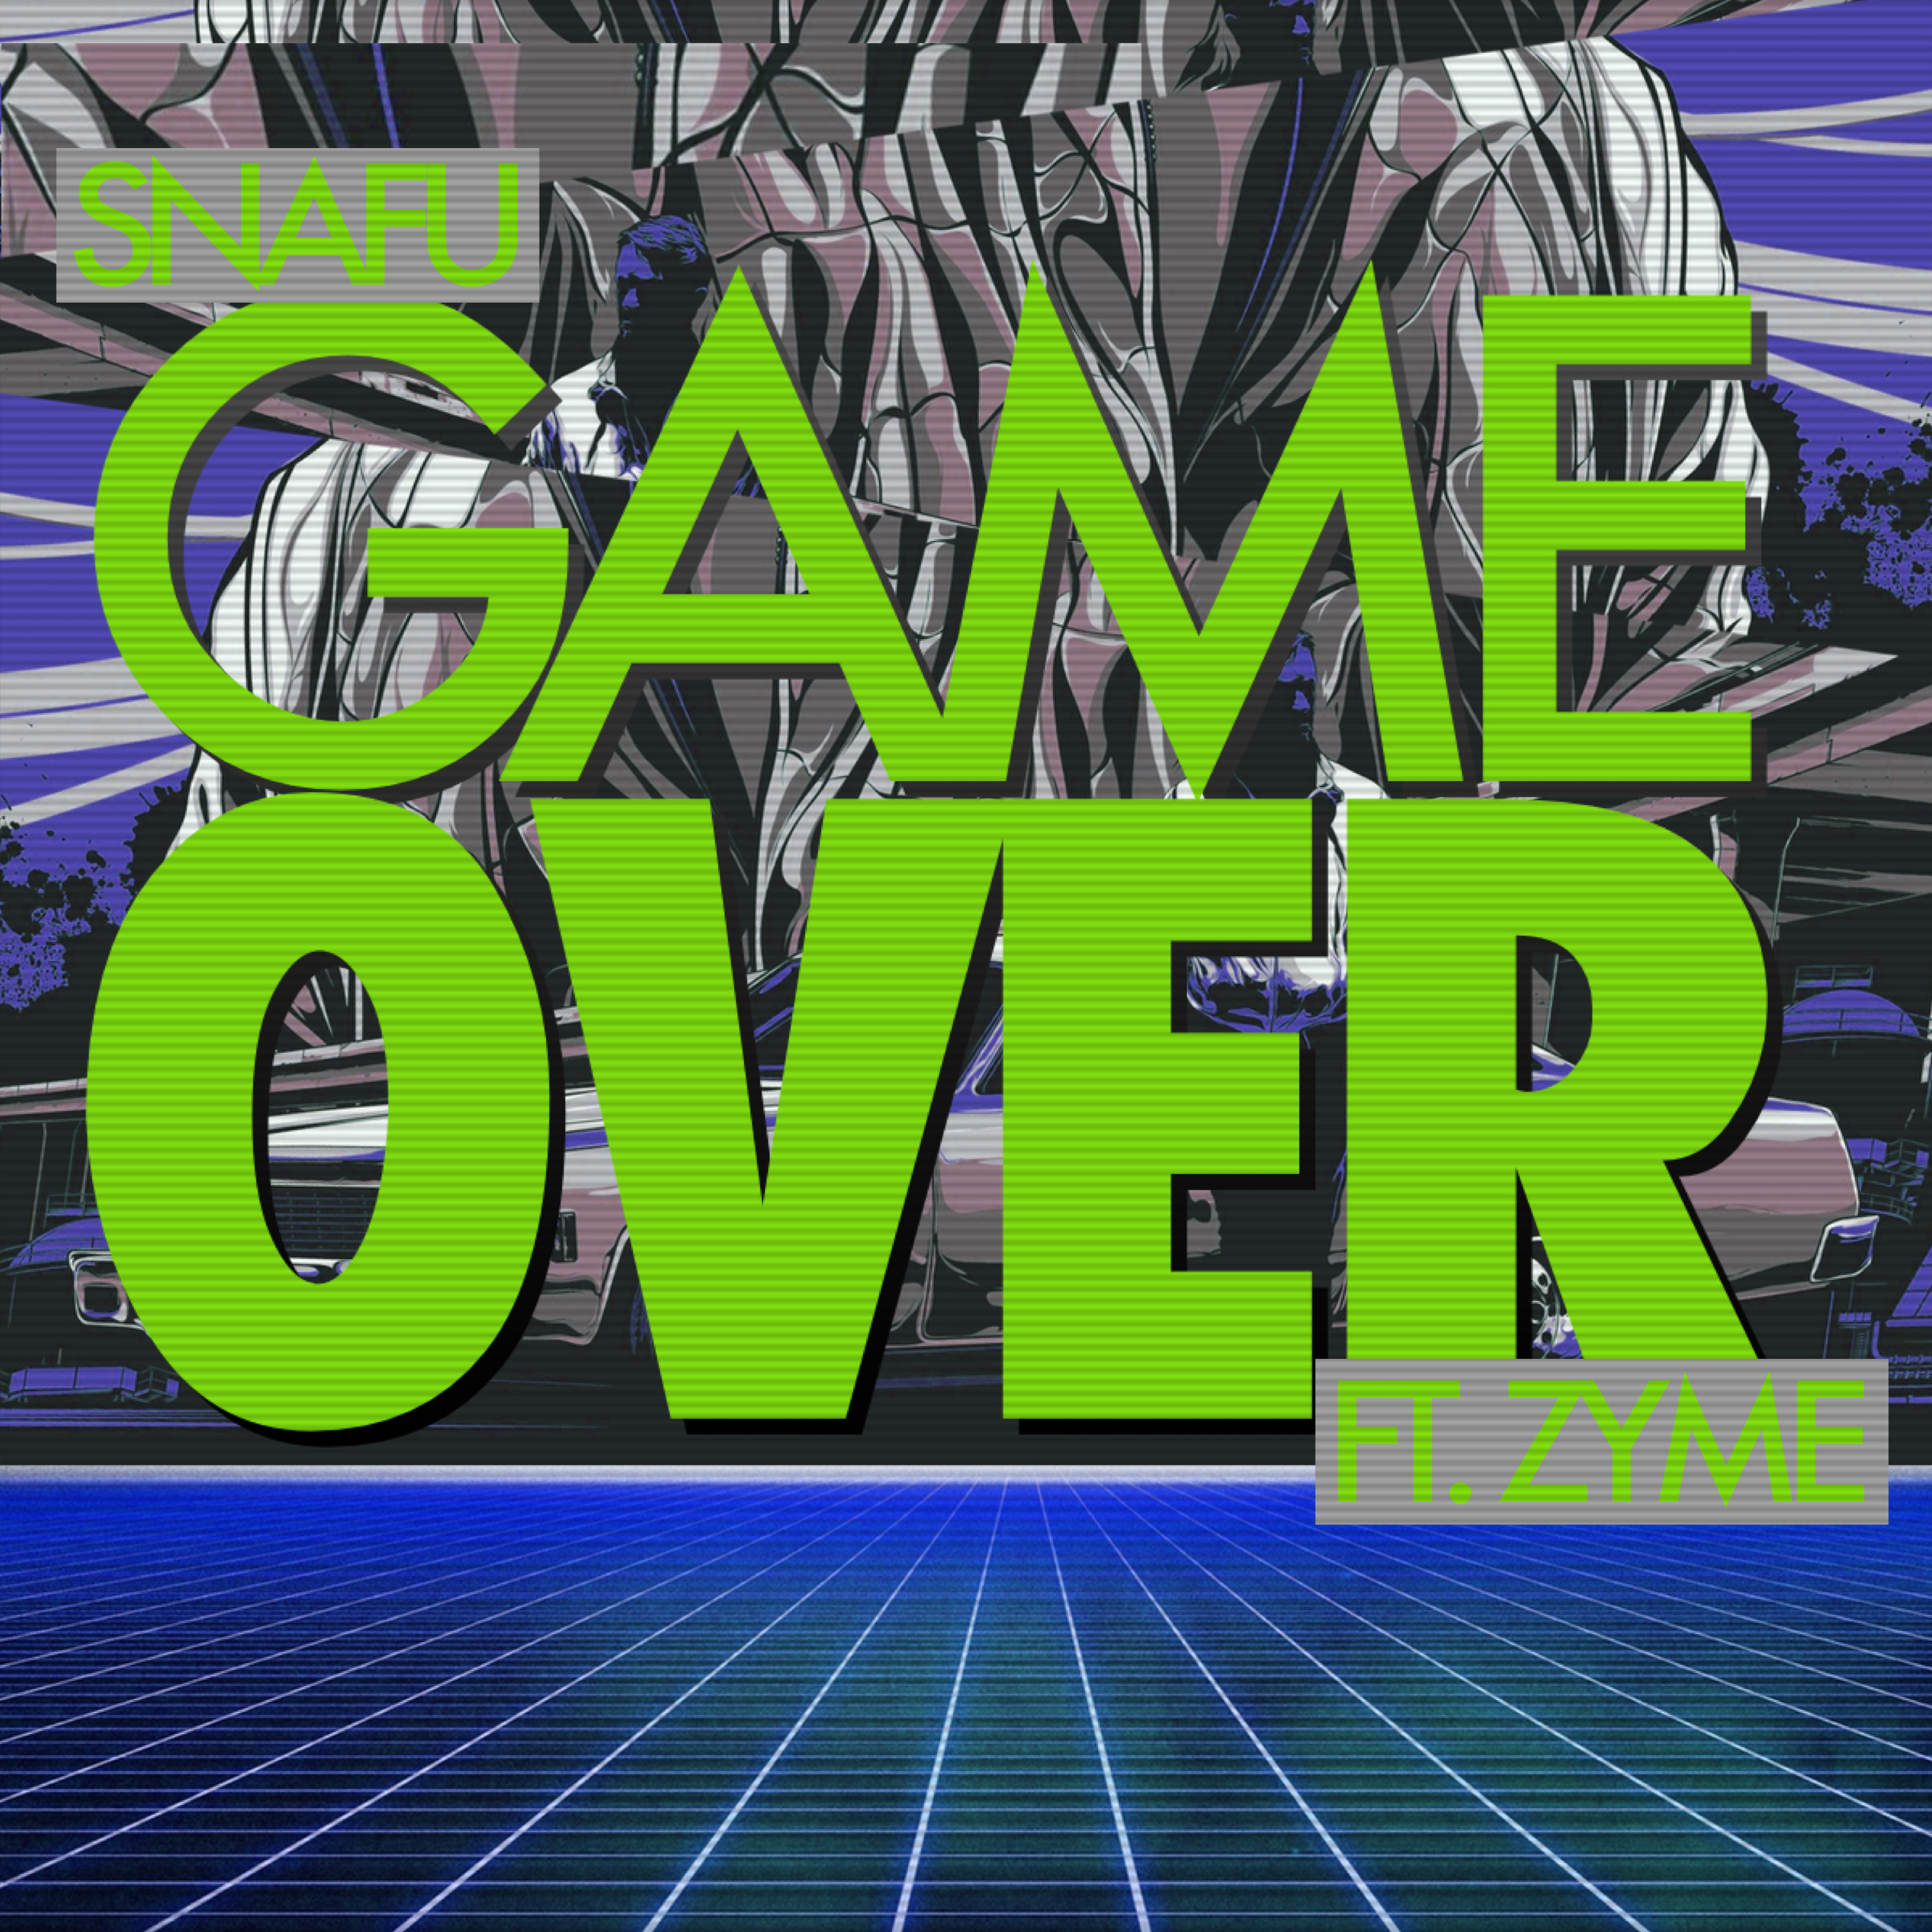 Game Over (ft. Zyme)